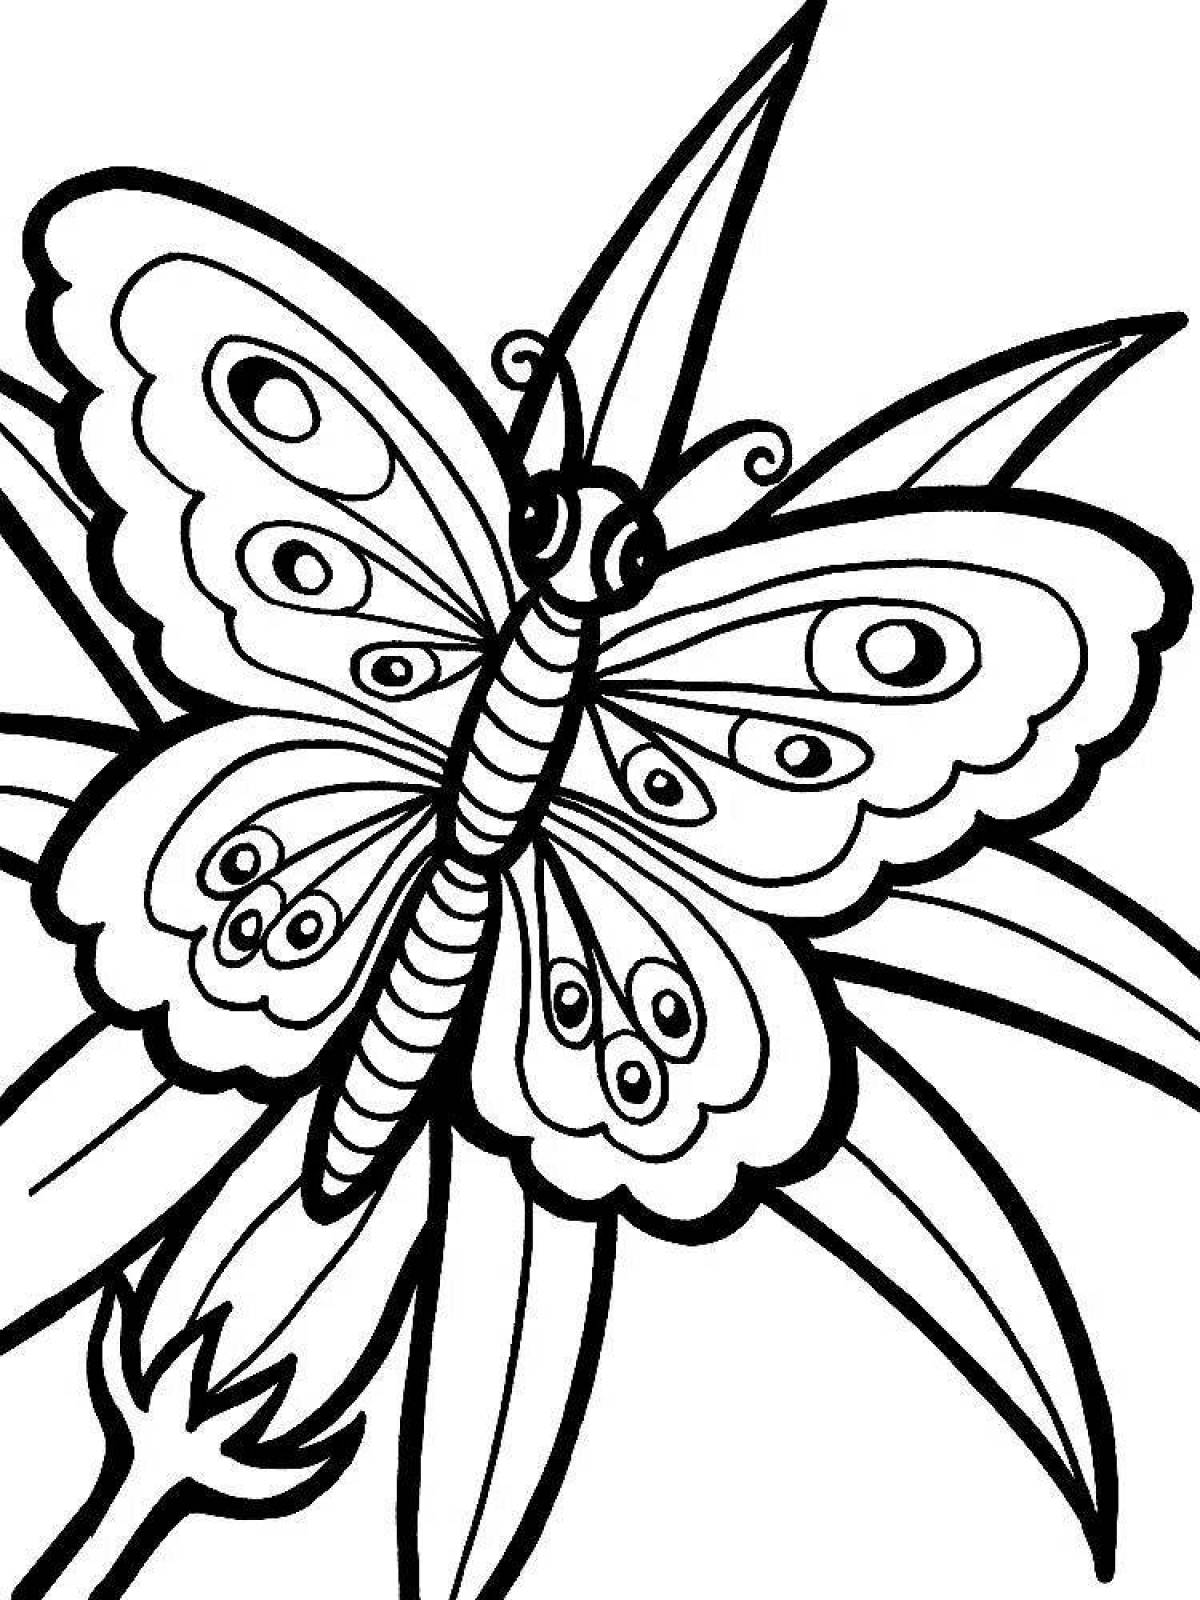 Coloring book hypnotic butterfly